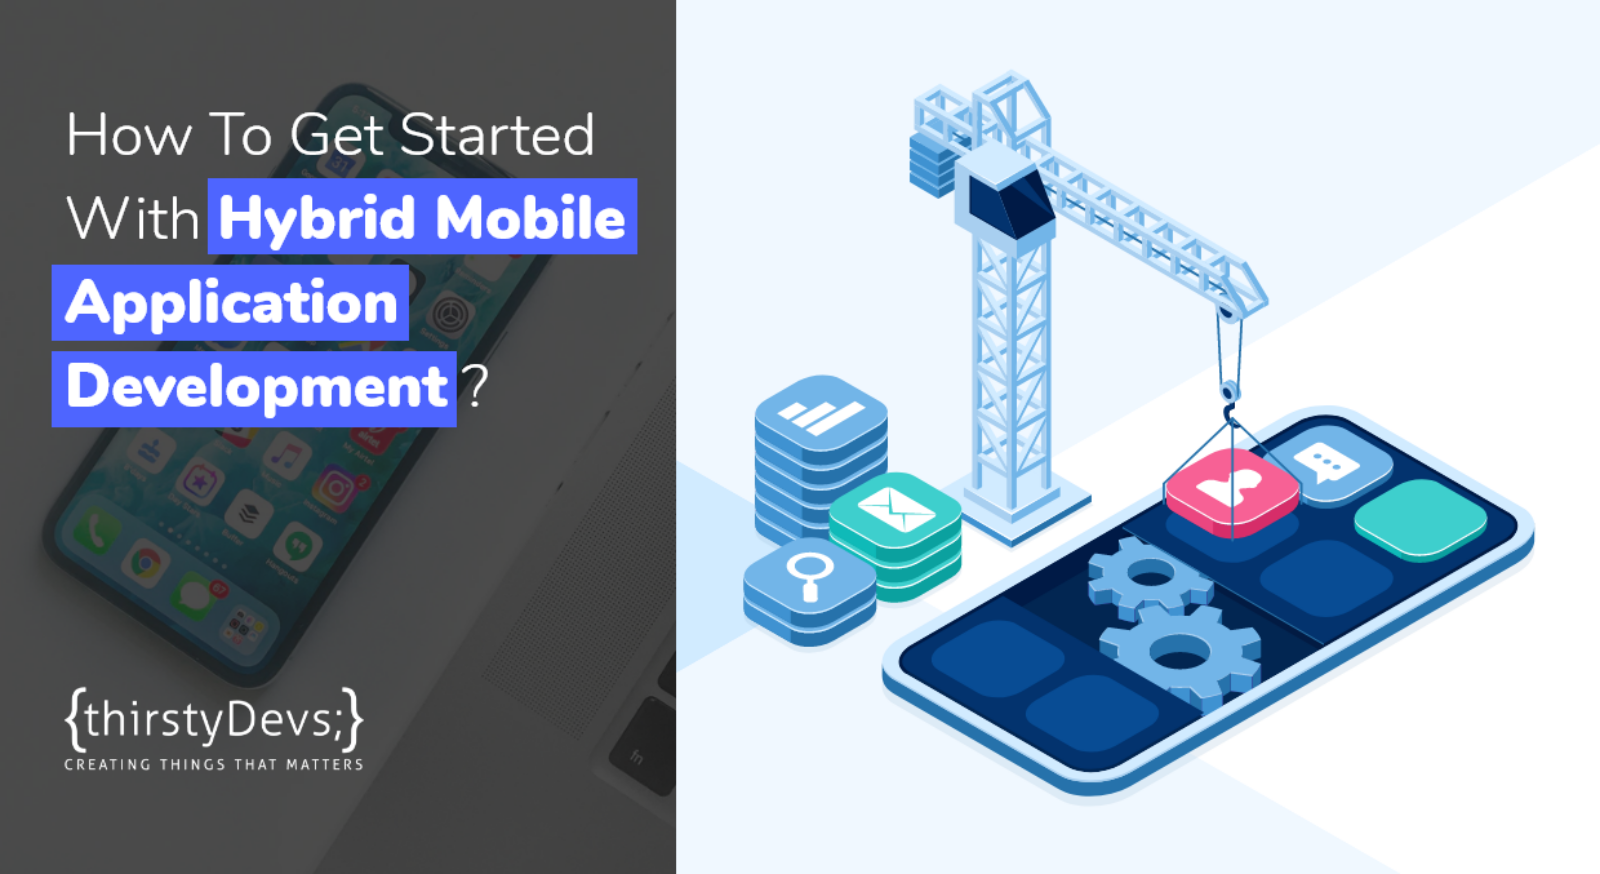 How to get started with Hybrid Mobile Application Development thirstyDevs